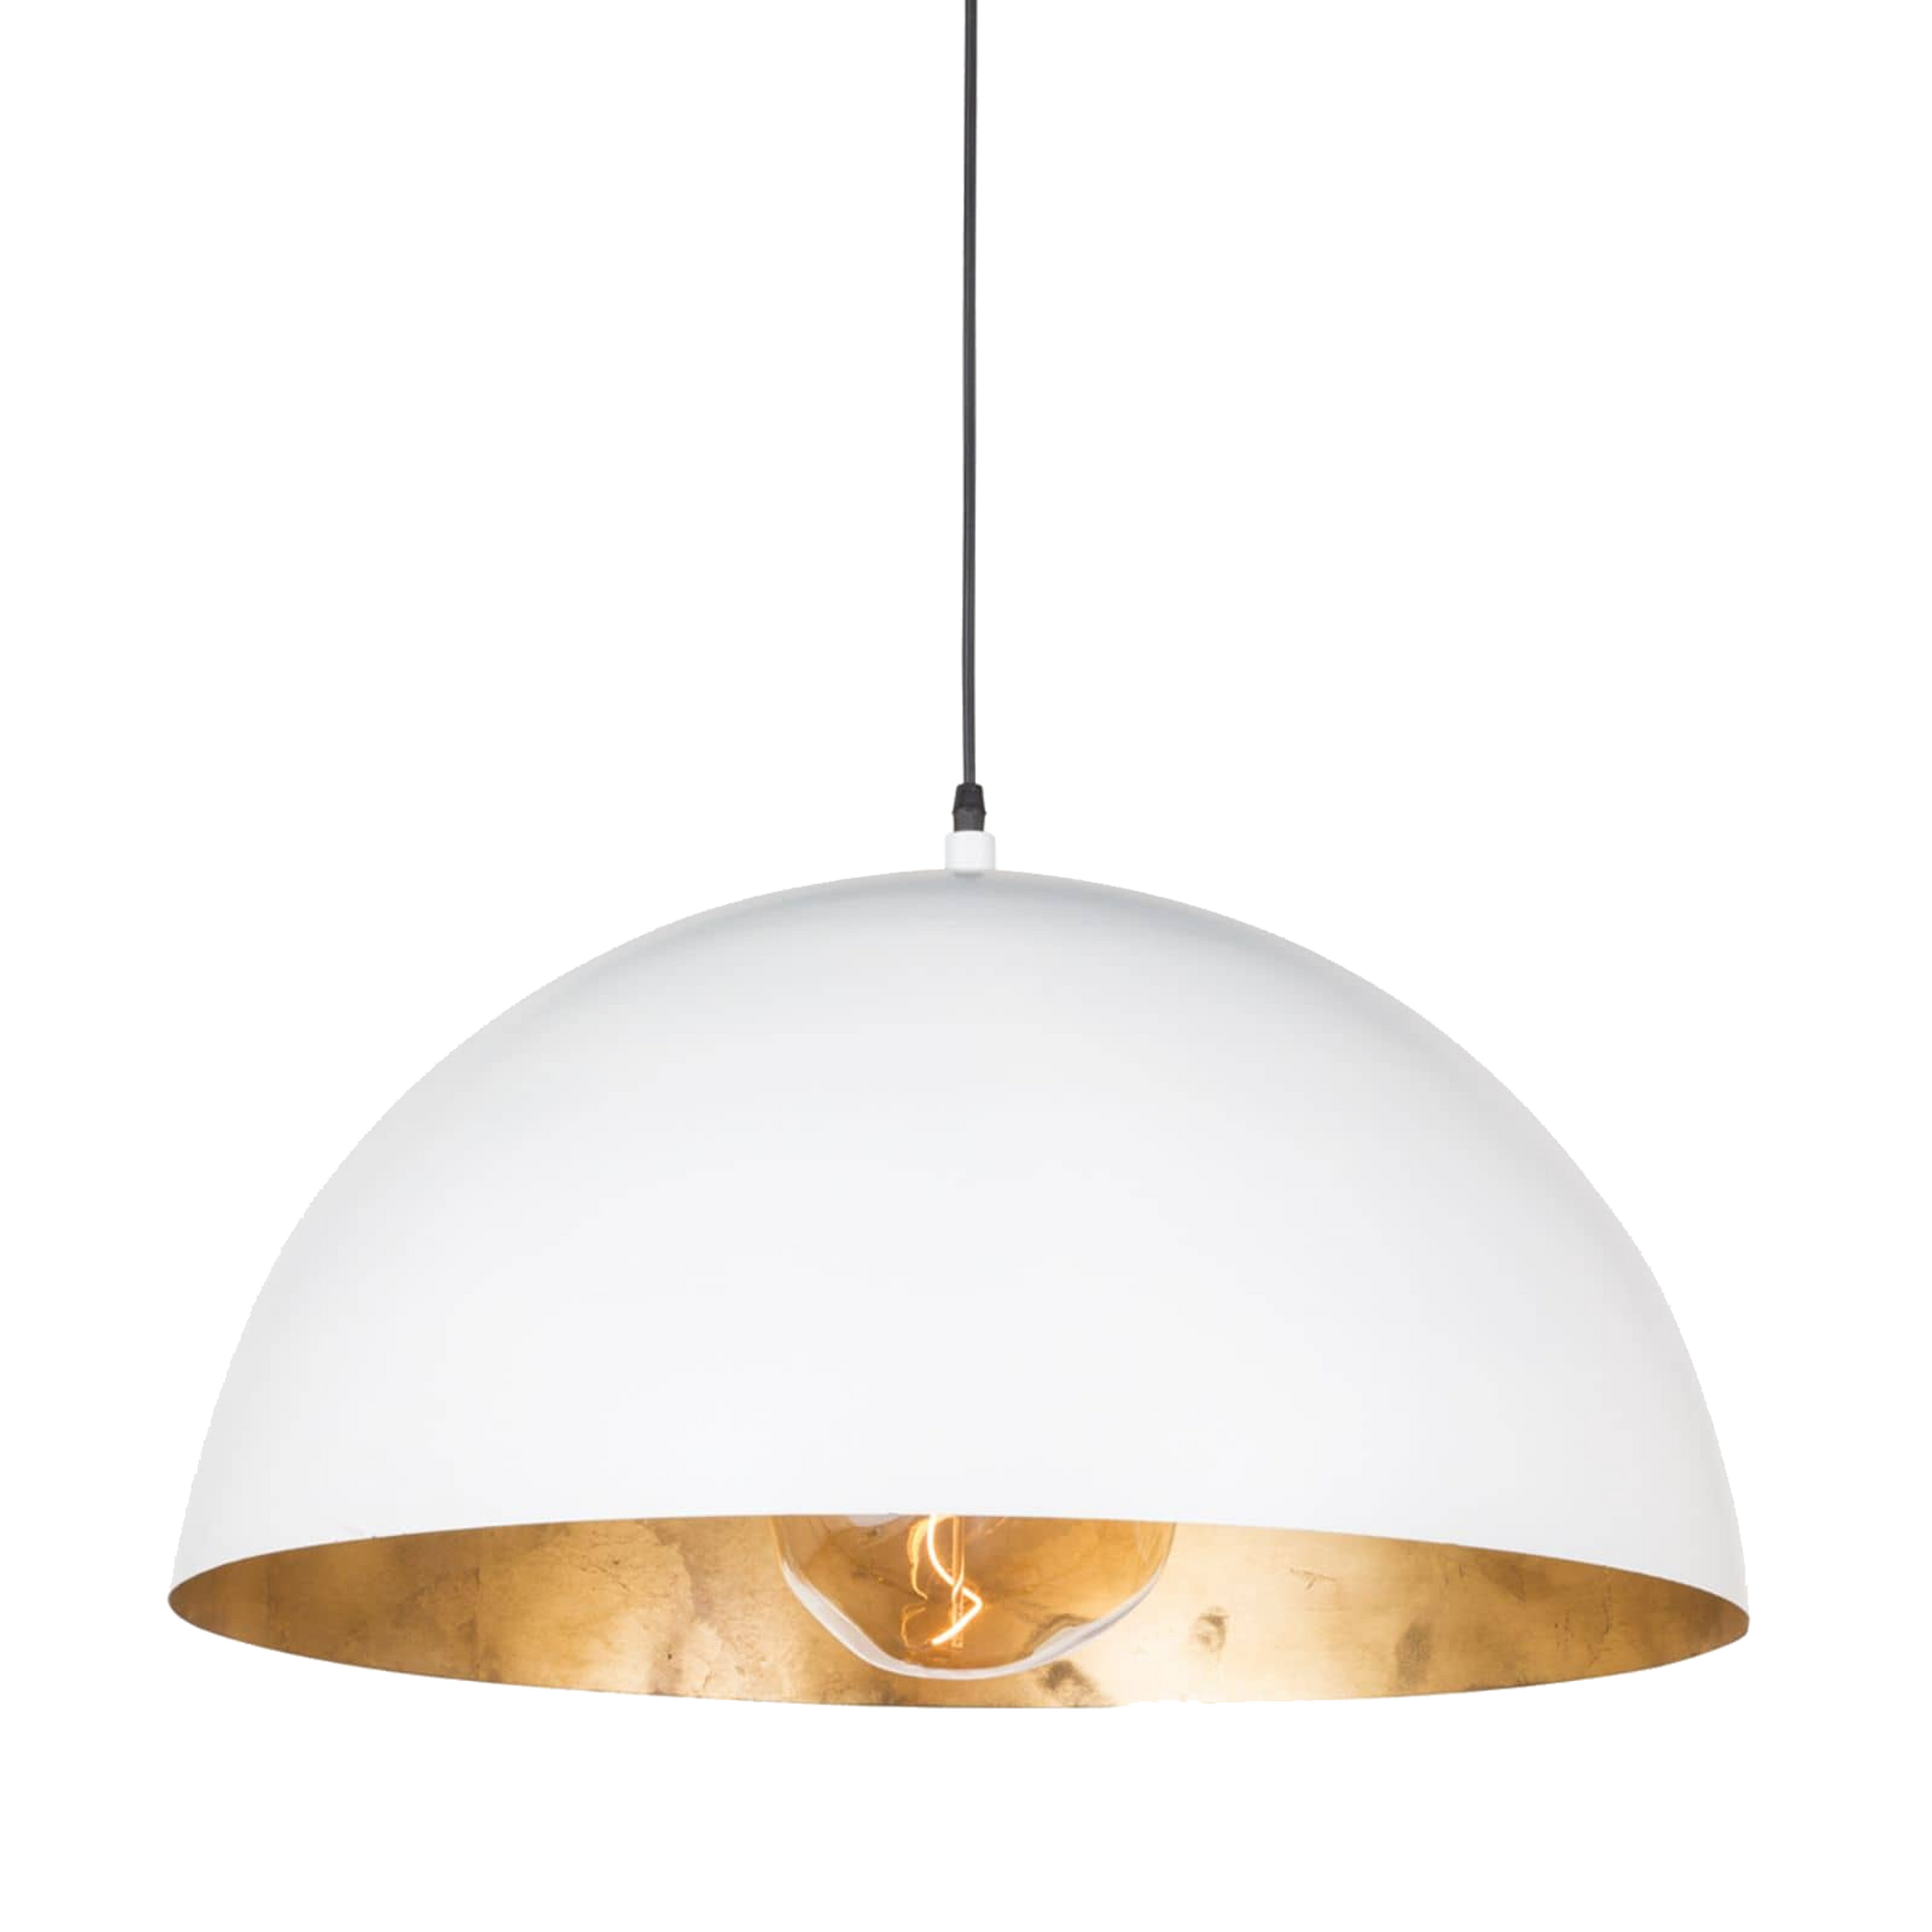 A simple dome shade brings sleek minimalism to the mix.